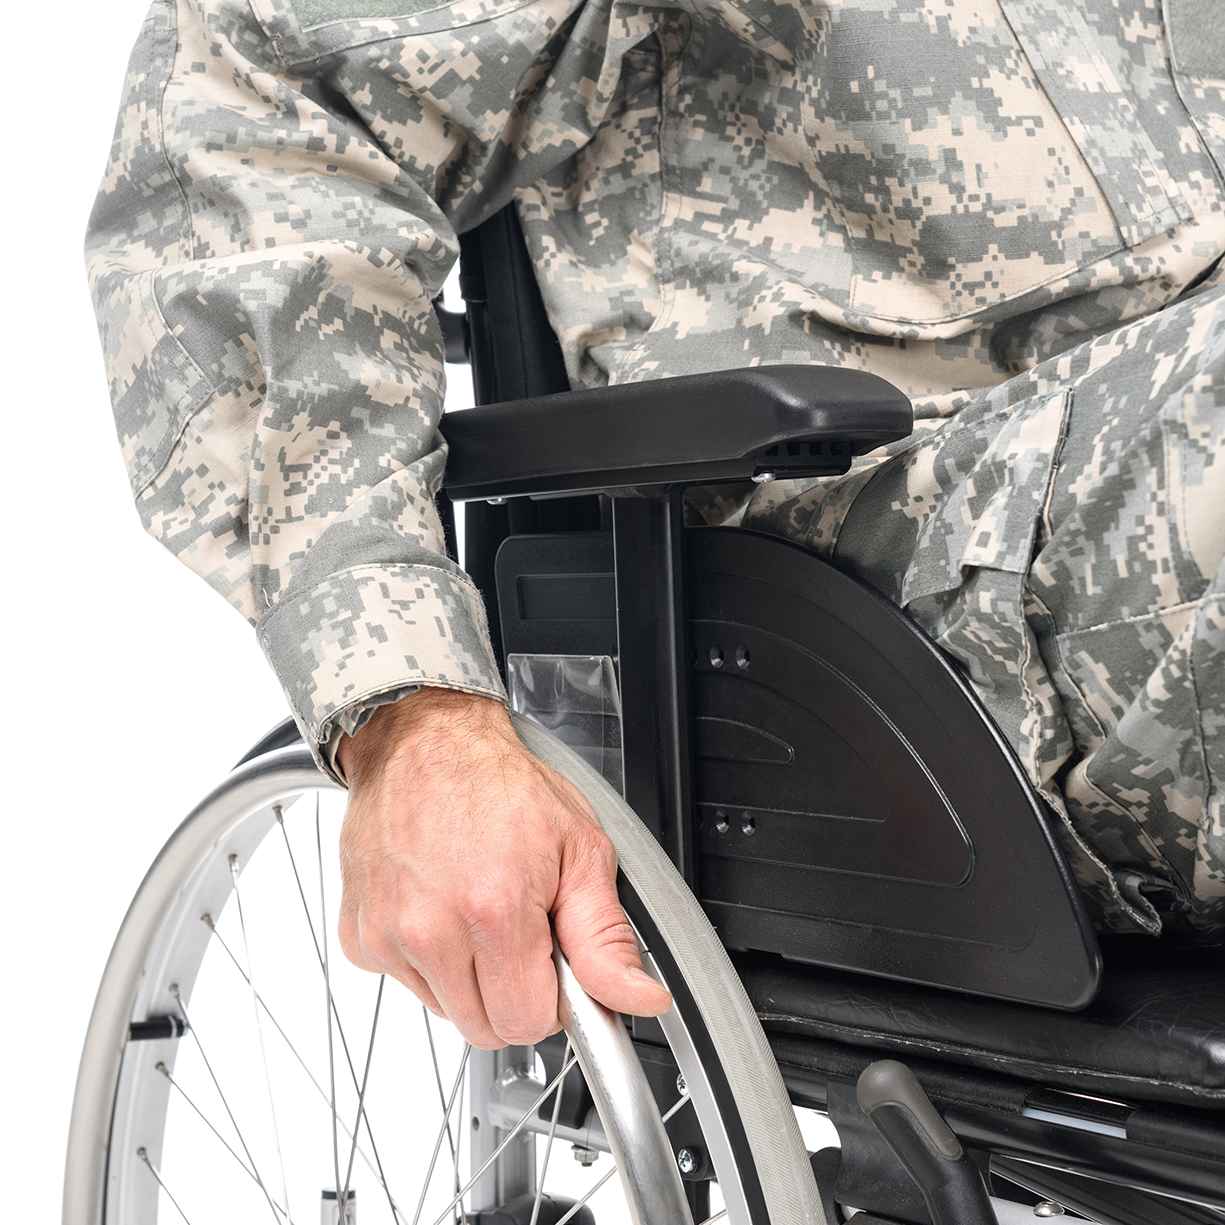 Eligibility for VA healthcare benefits is determined by a variety of factors, including the veteran's service-connected disabilities, income level, and other factors. If you are a veteran and want to receive care at a VA medical center, you will need to enroll in the VA healthcare system